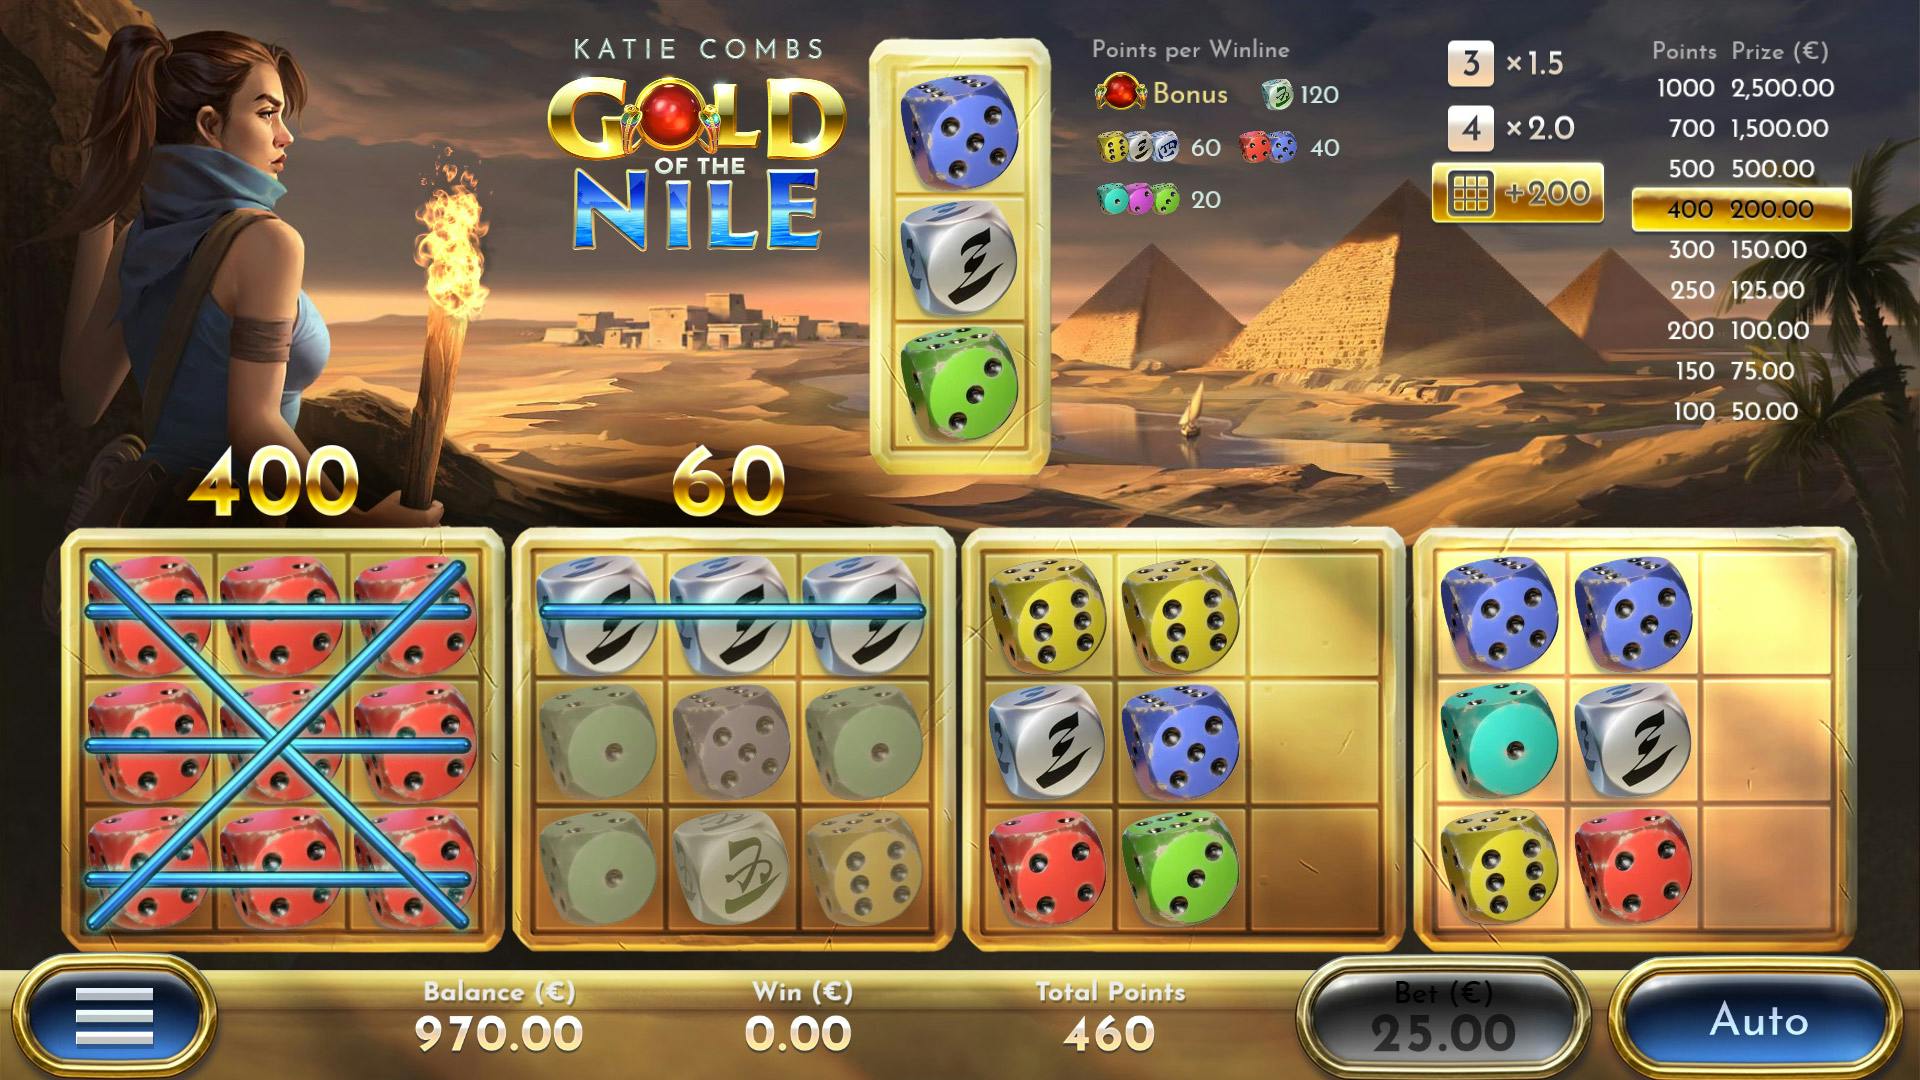 Airdice Katie Combs Gold of the Nile dice game